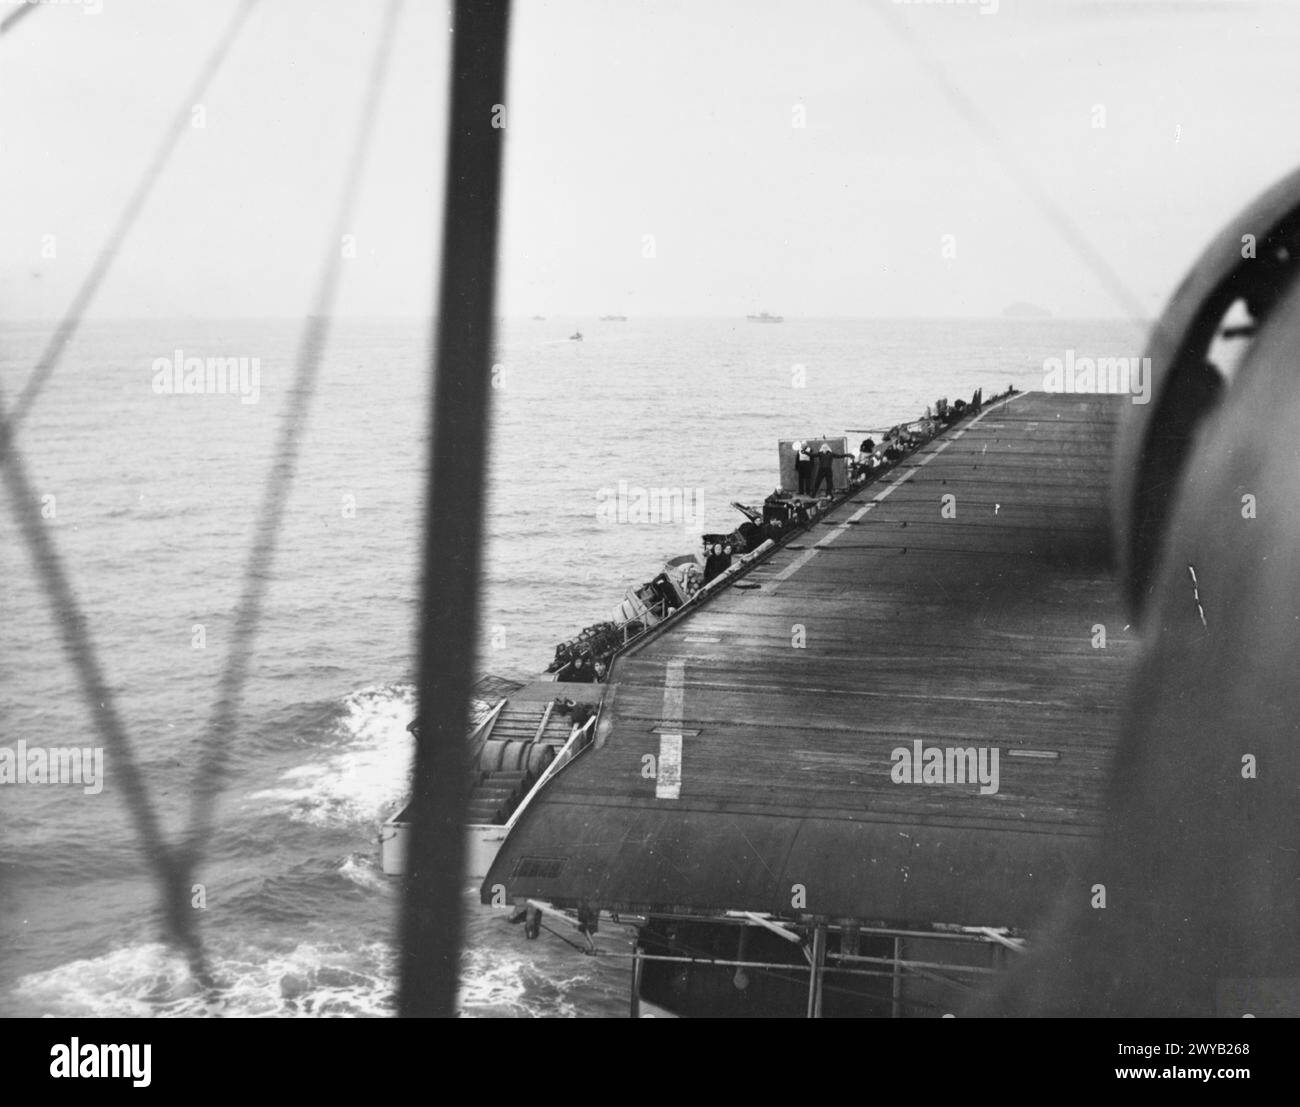 WITH THE ESCORT CARRIER HMS SMITER. 1944, AT SEA, ON BOARD A FAIREY SWORDFISH OF THE CARRIER DURING THE TRAINING OF DECK LANDING CONTROL OFFICERS, WHEN AIRCRAFT WERE TAKING OFF AND LANDING ON. - Looking down on the SMITER as a Fairey Swordfish came in to land-on. , Stock Photo